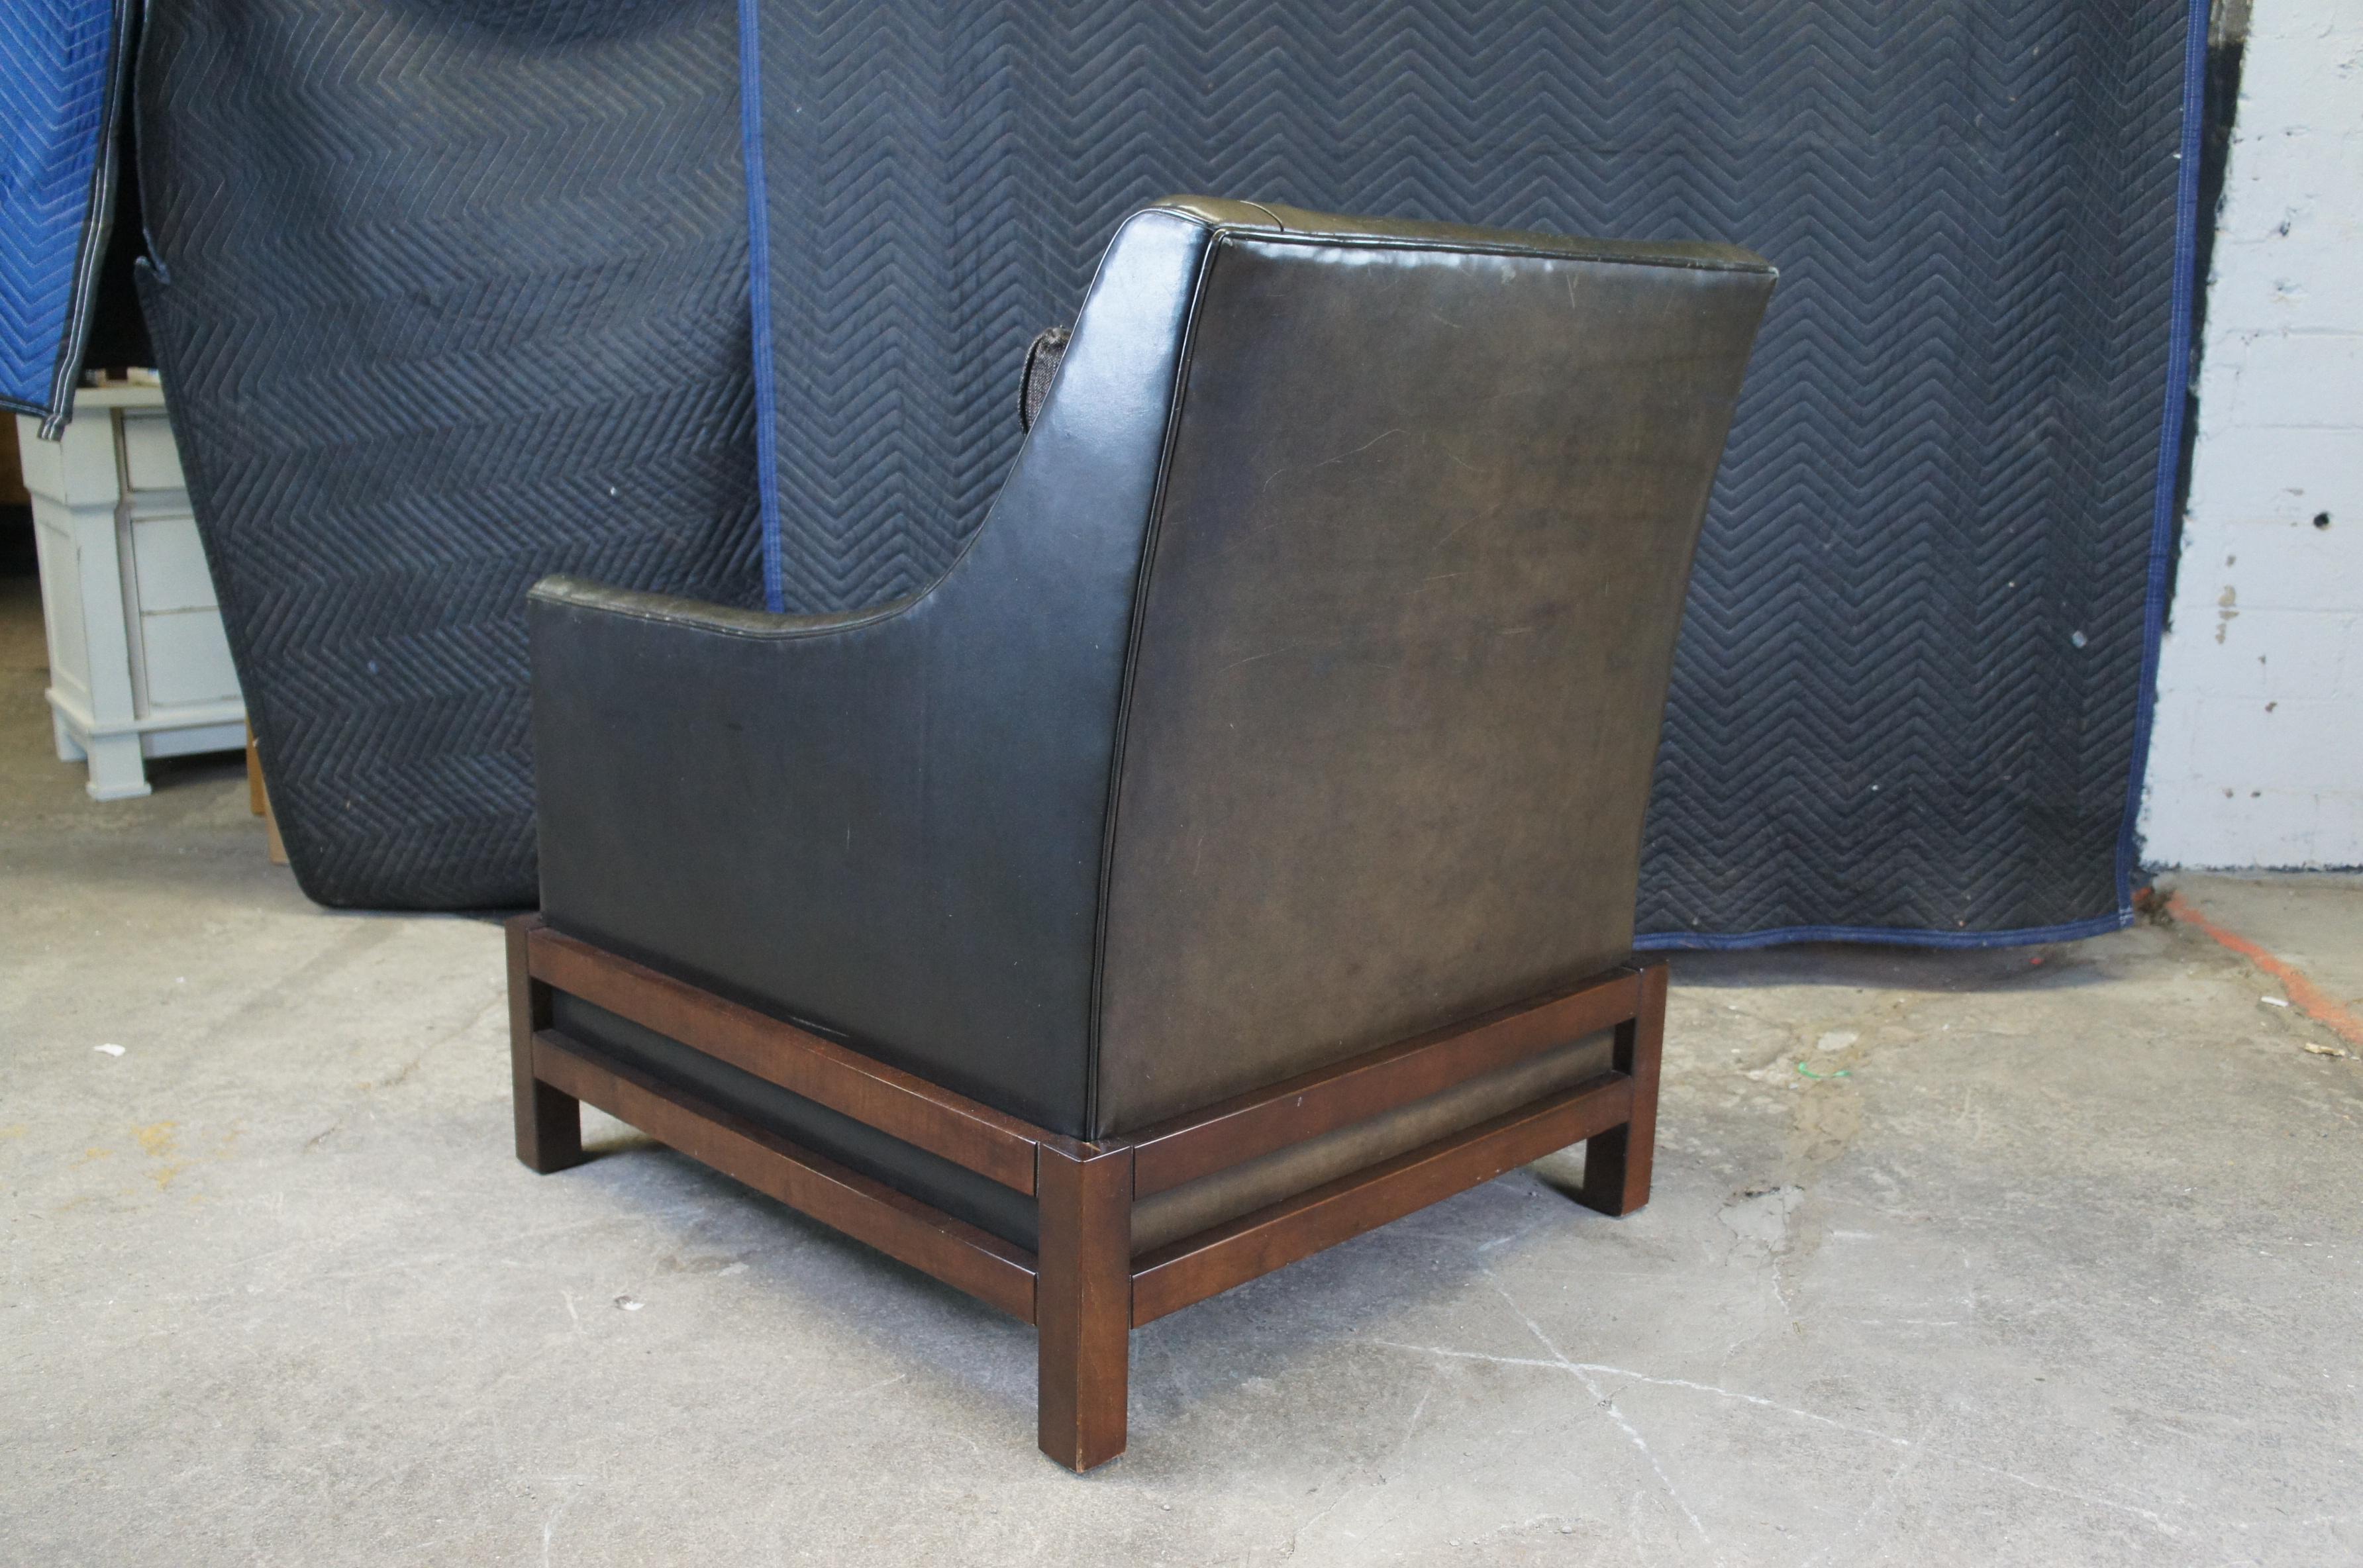 Upholstery Vintage Baker Furniture Laura Kirar Modern Black Leather Neue Club Lounge Chair For Sale